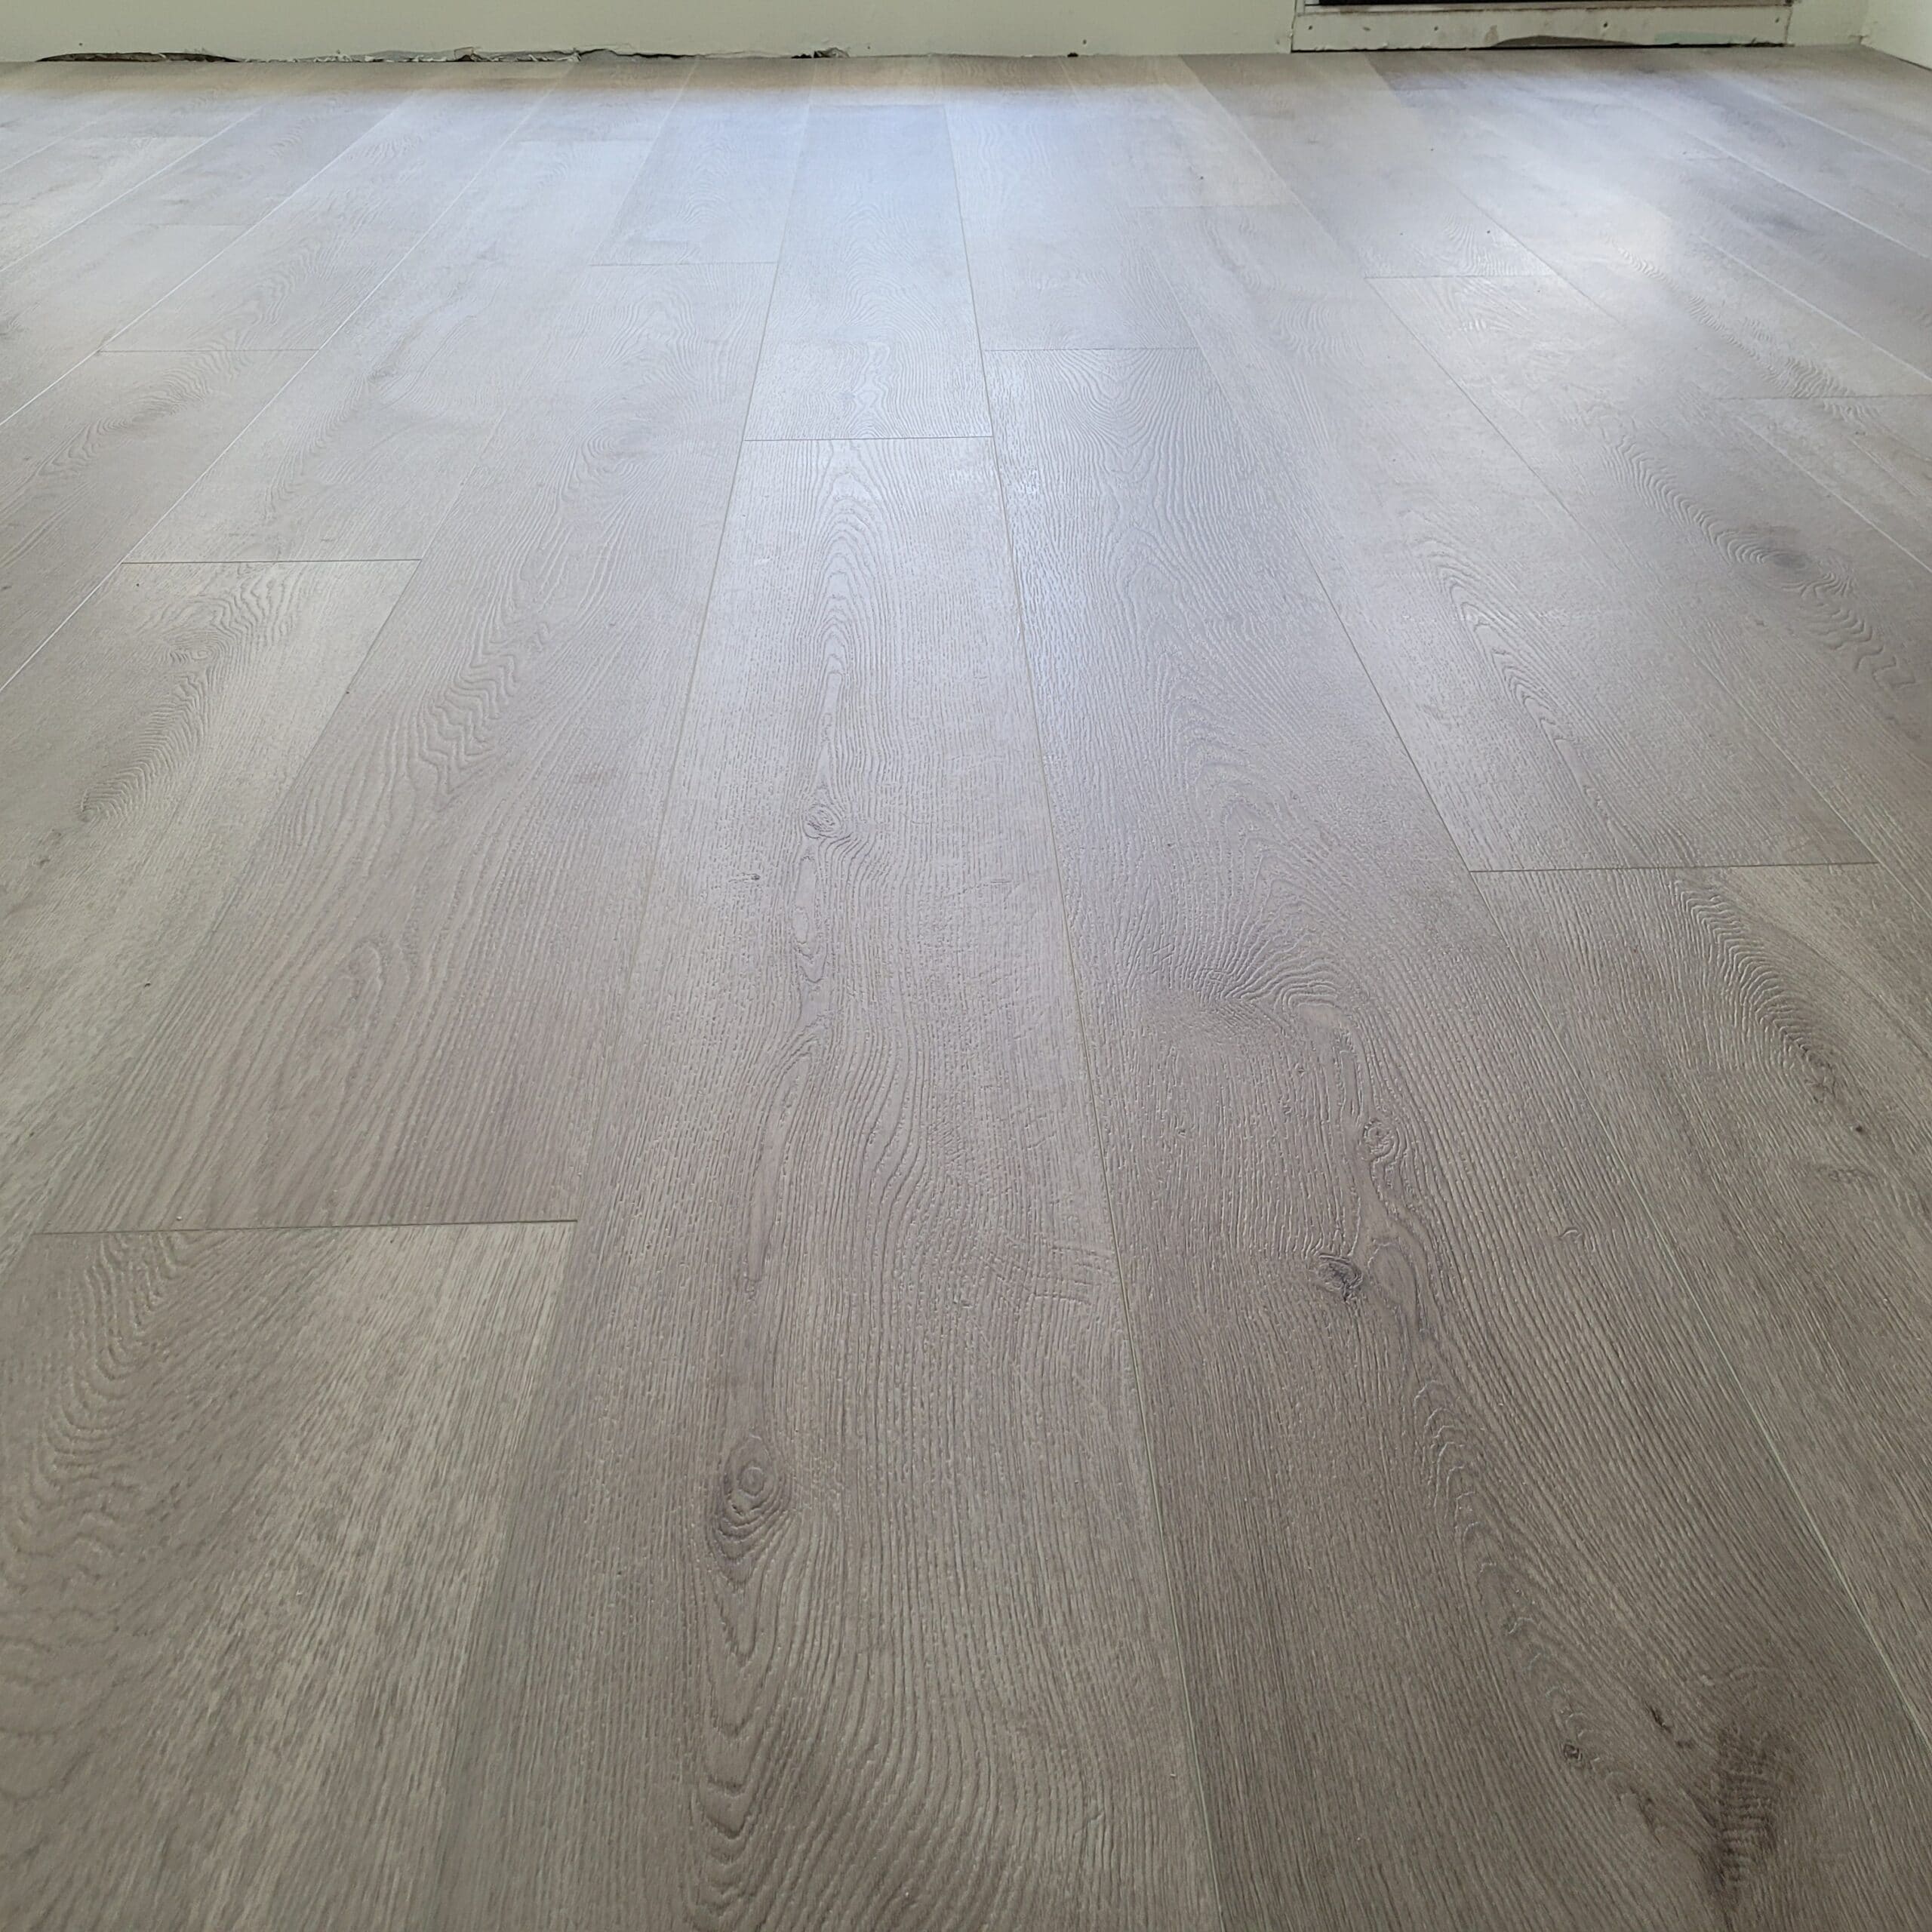 Multi-toned wood floors available in Vancouver